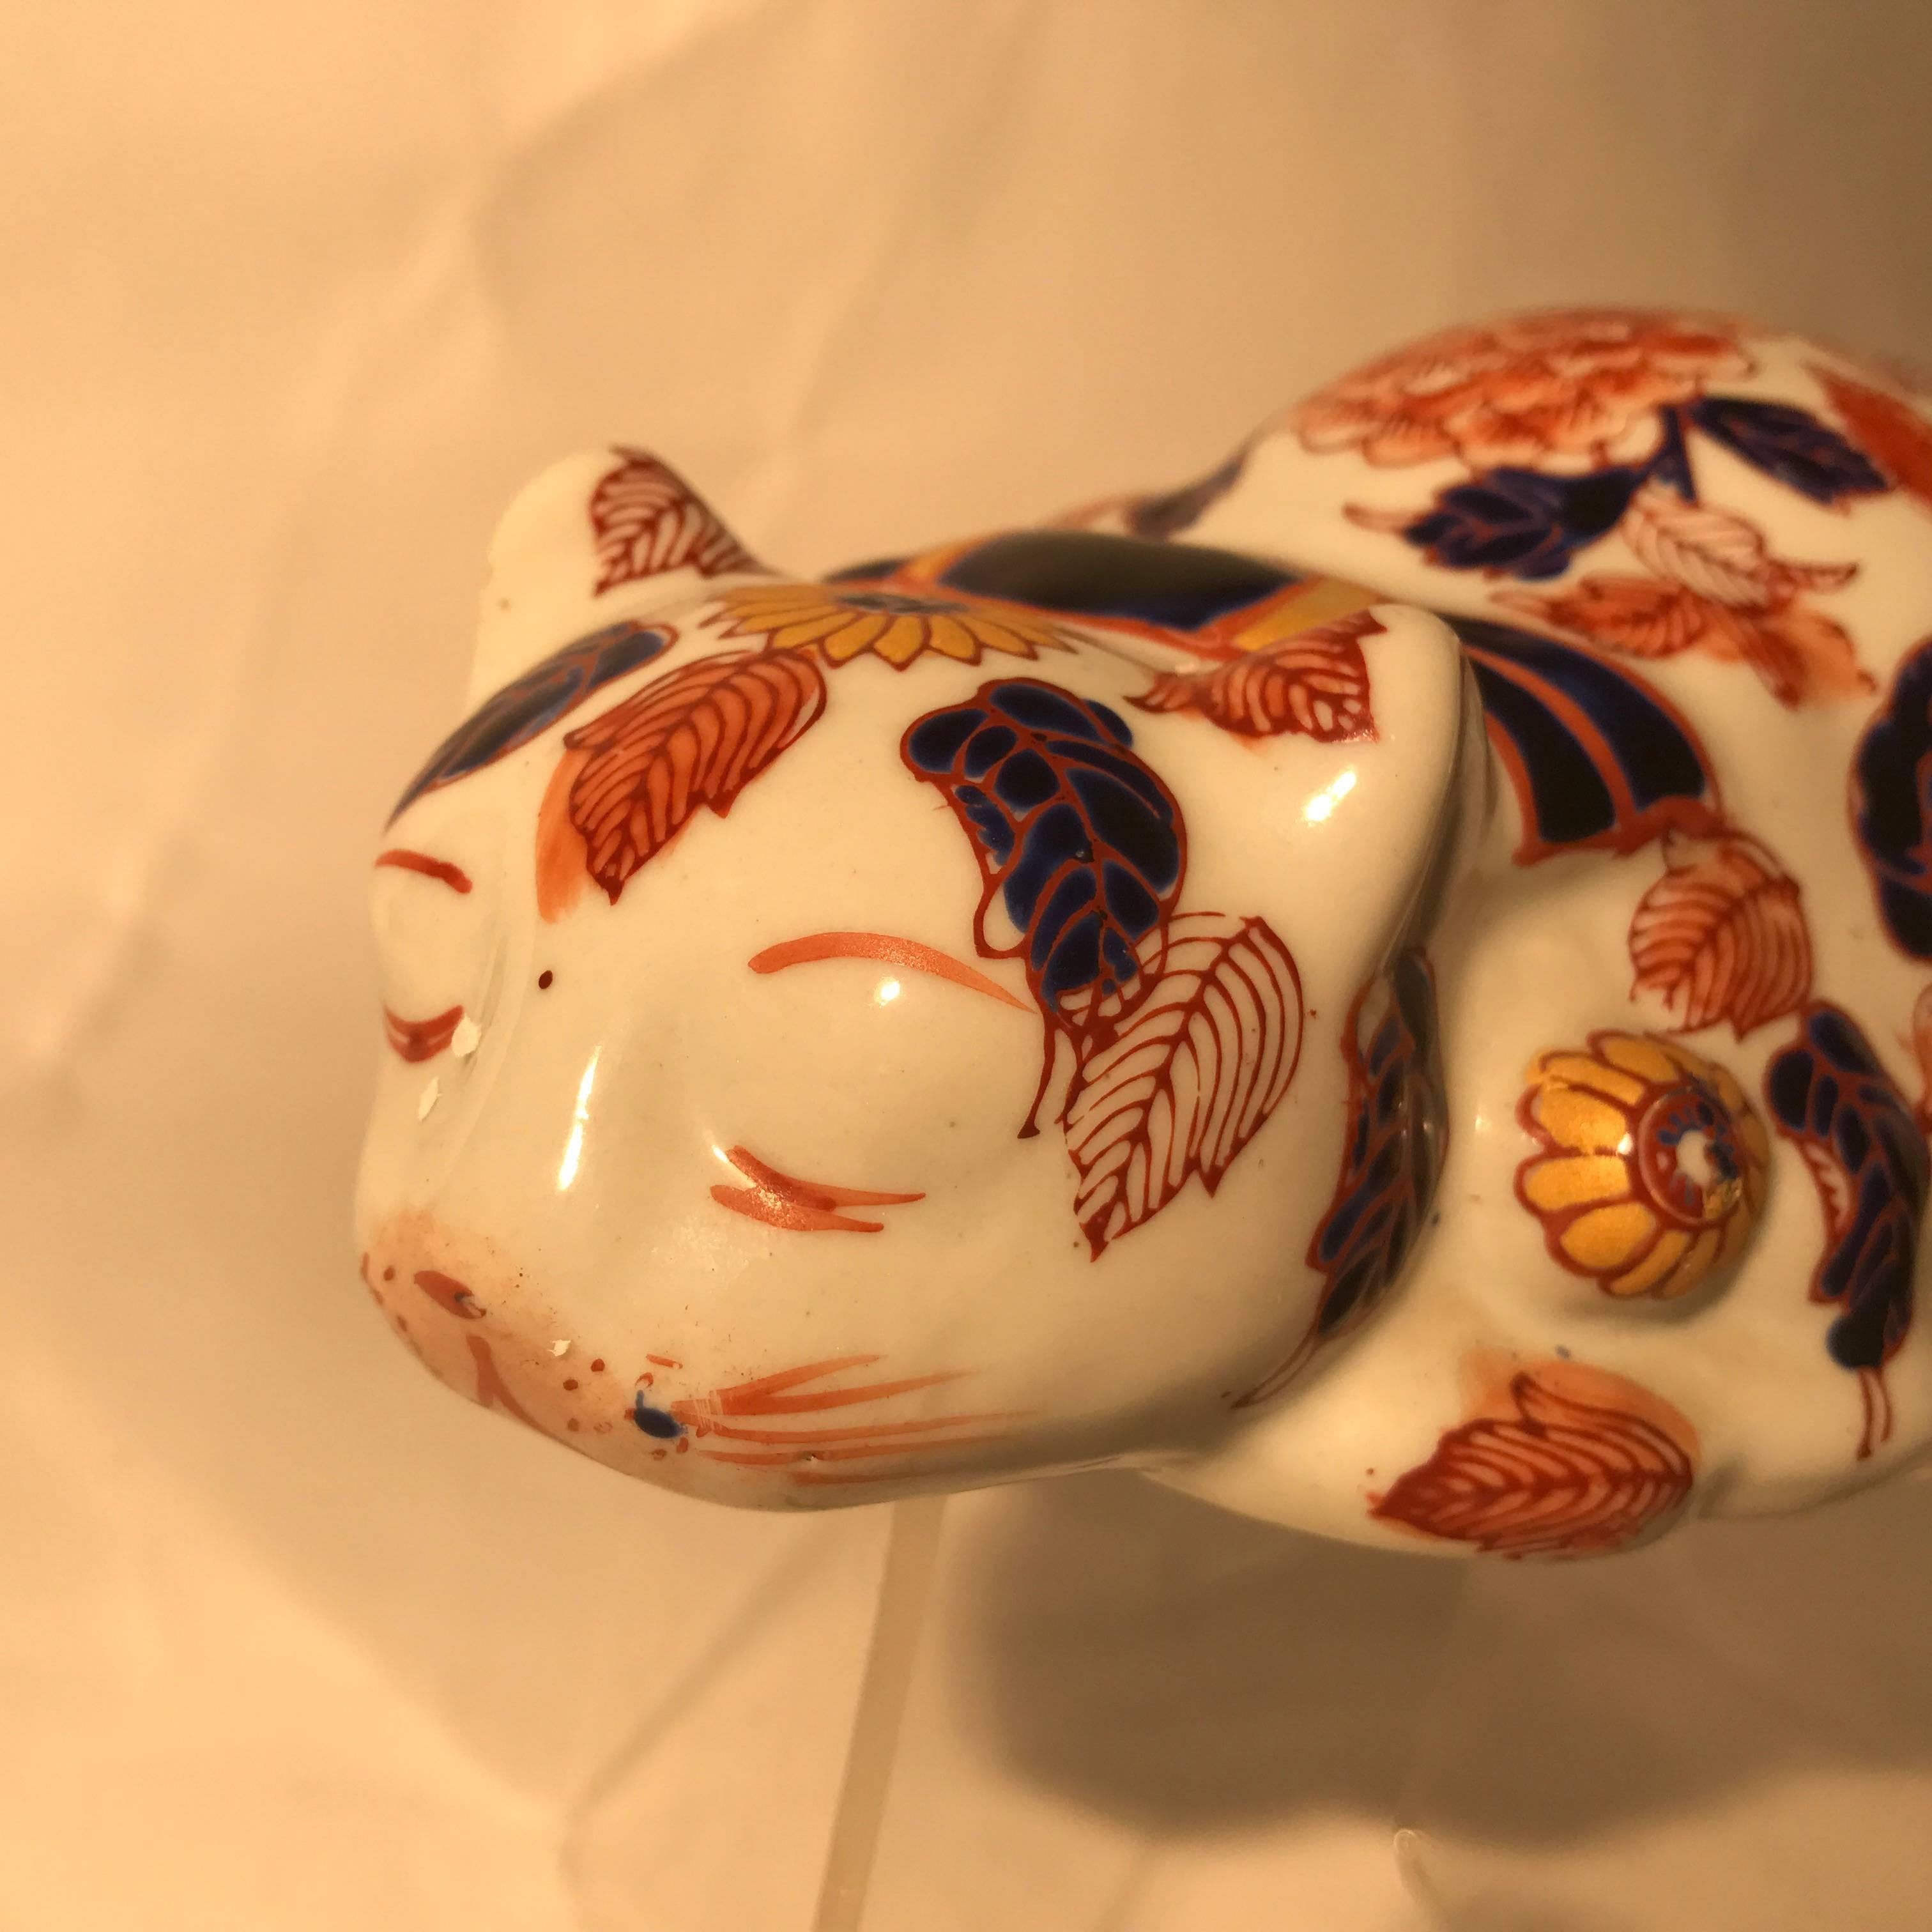 Japanese antique red enameled porcelain crouching cat, sculpture Okimono signed base, 1920.

Maker: Imari red enamels over blue, yellow, and green under glazing

Dimensions: 3 inches tall and 8 inches length

Large sculpture.
Hand